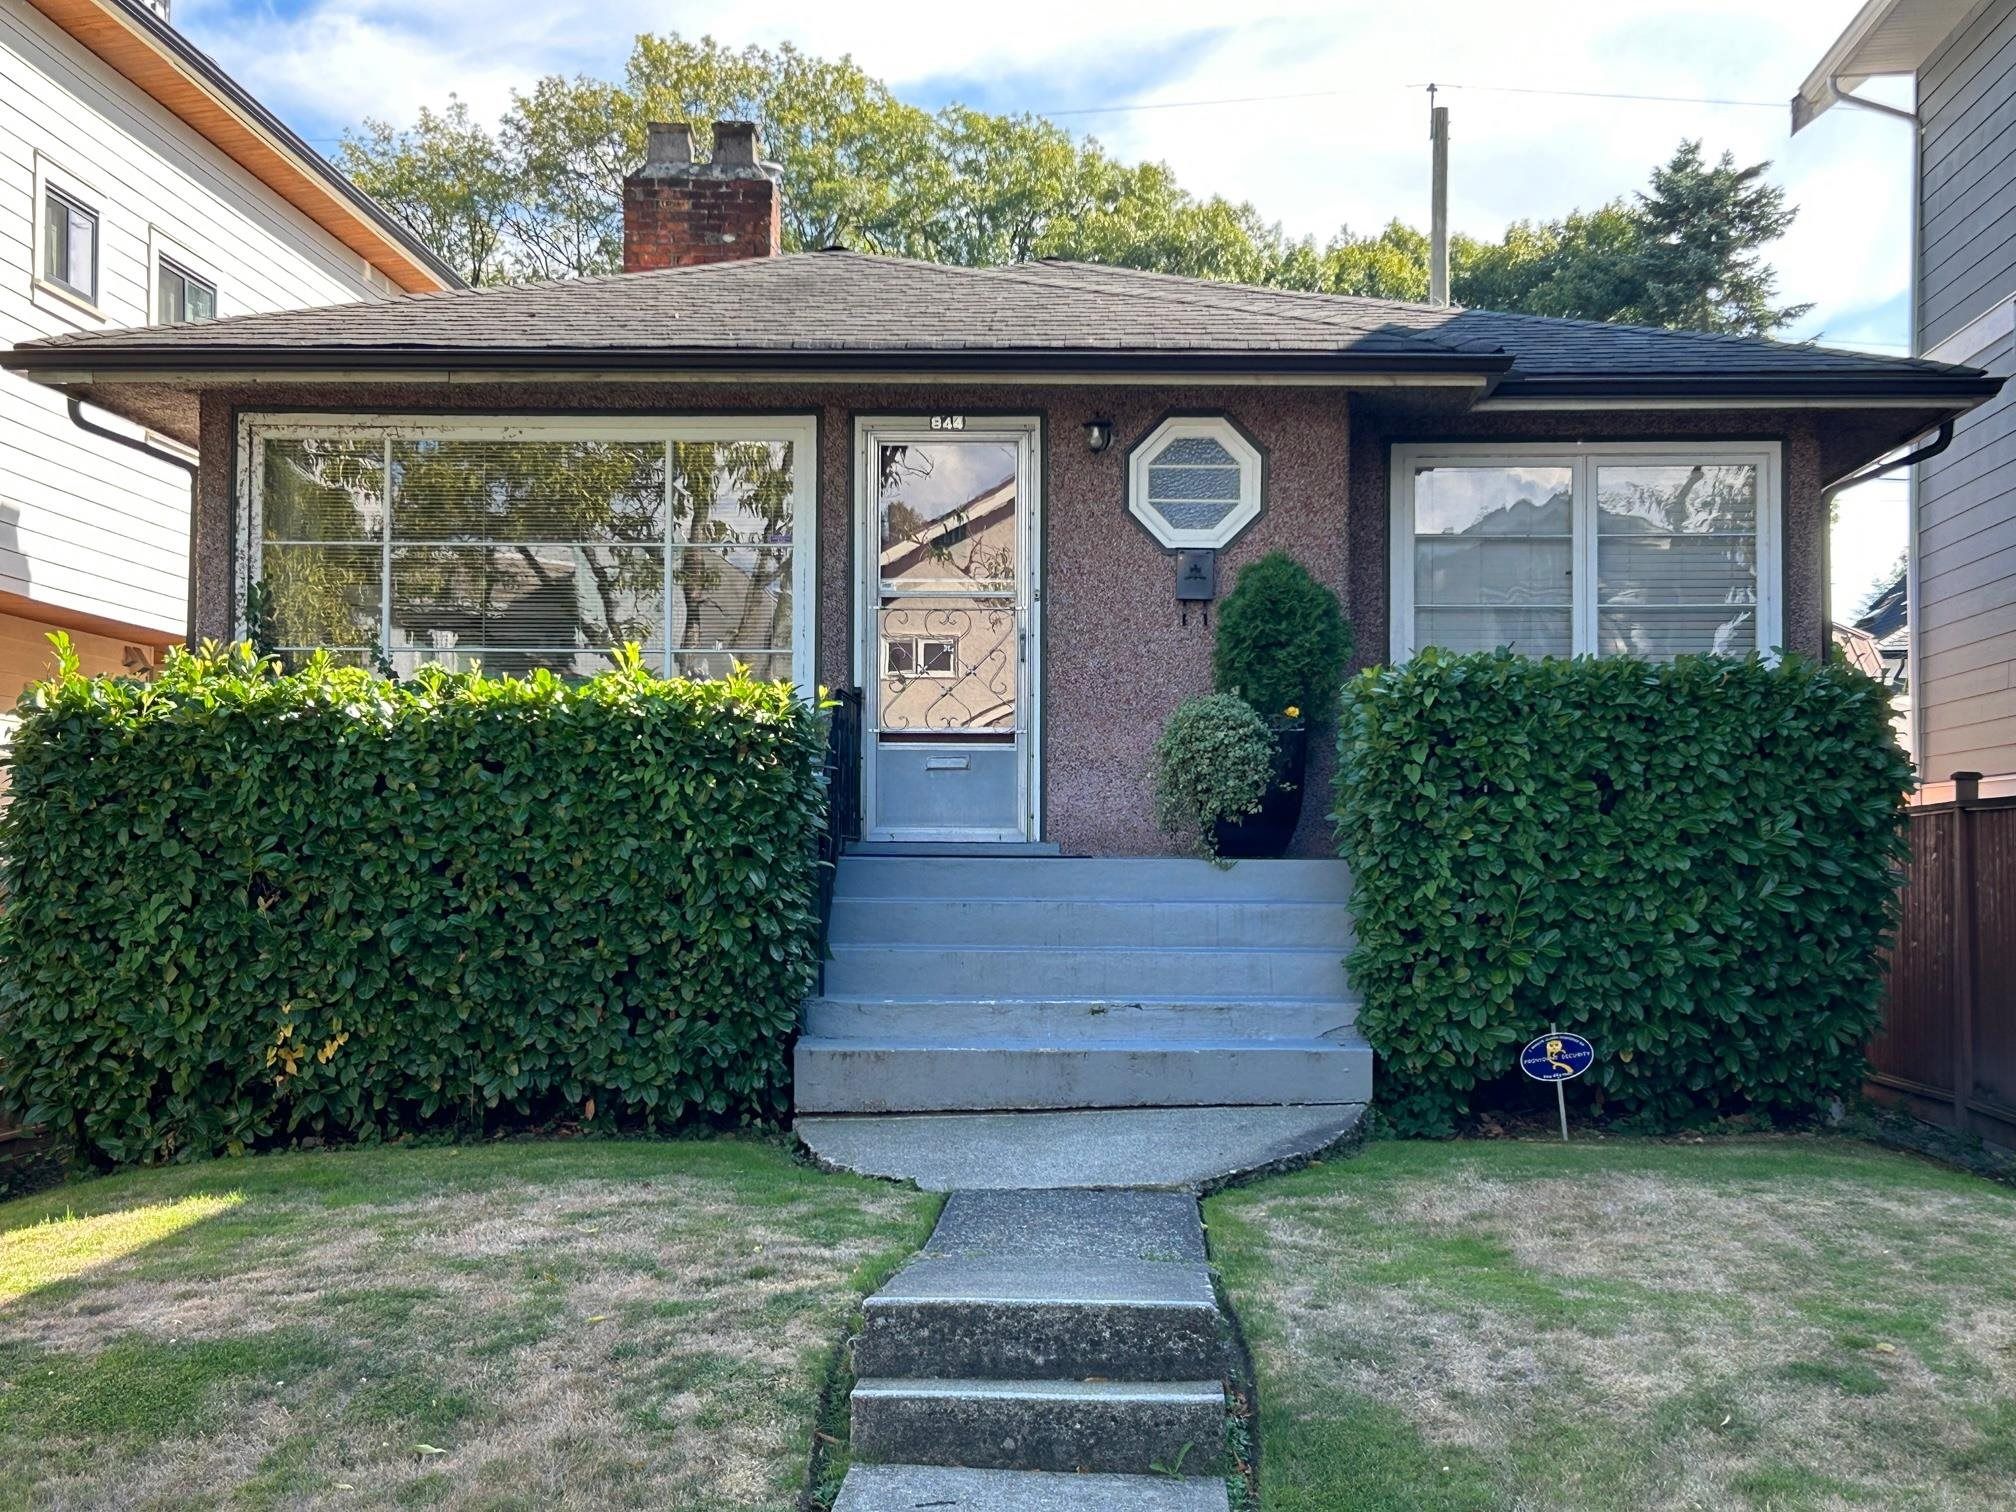 I have sold a property at 844 19TH AVE W in Vancouver
